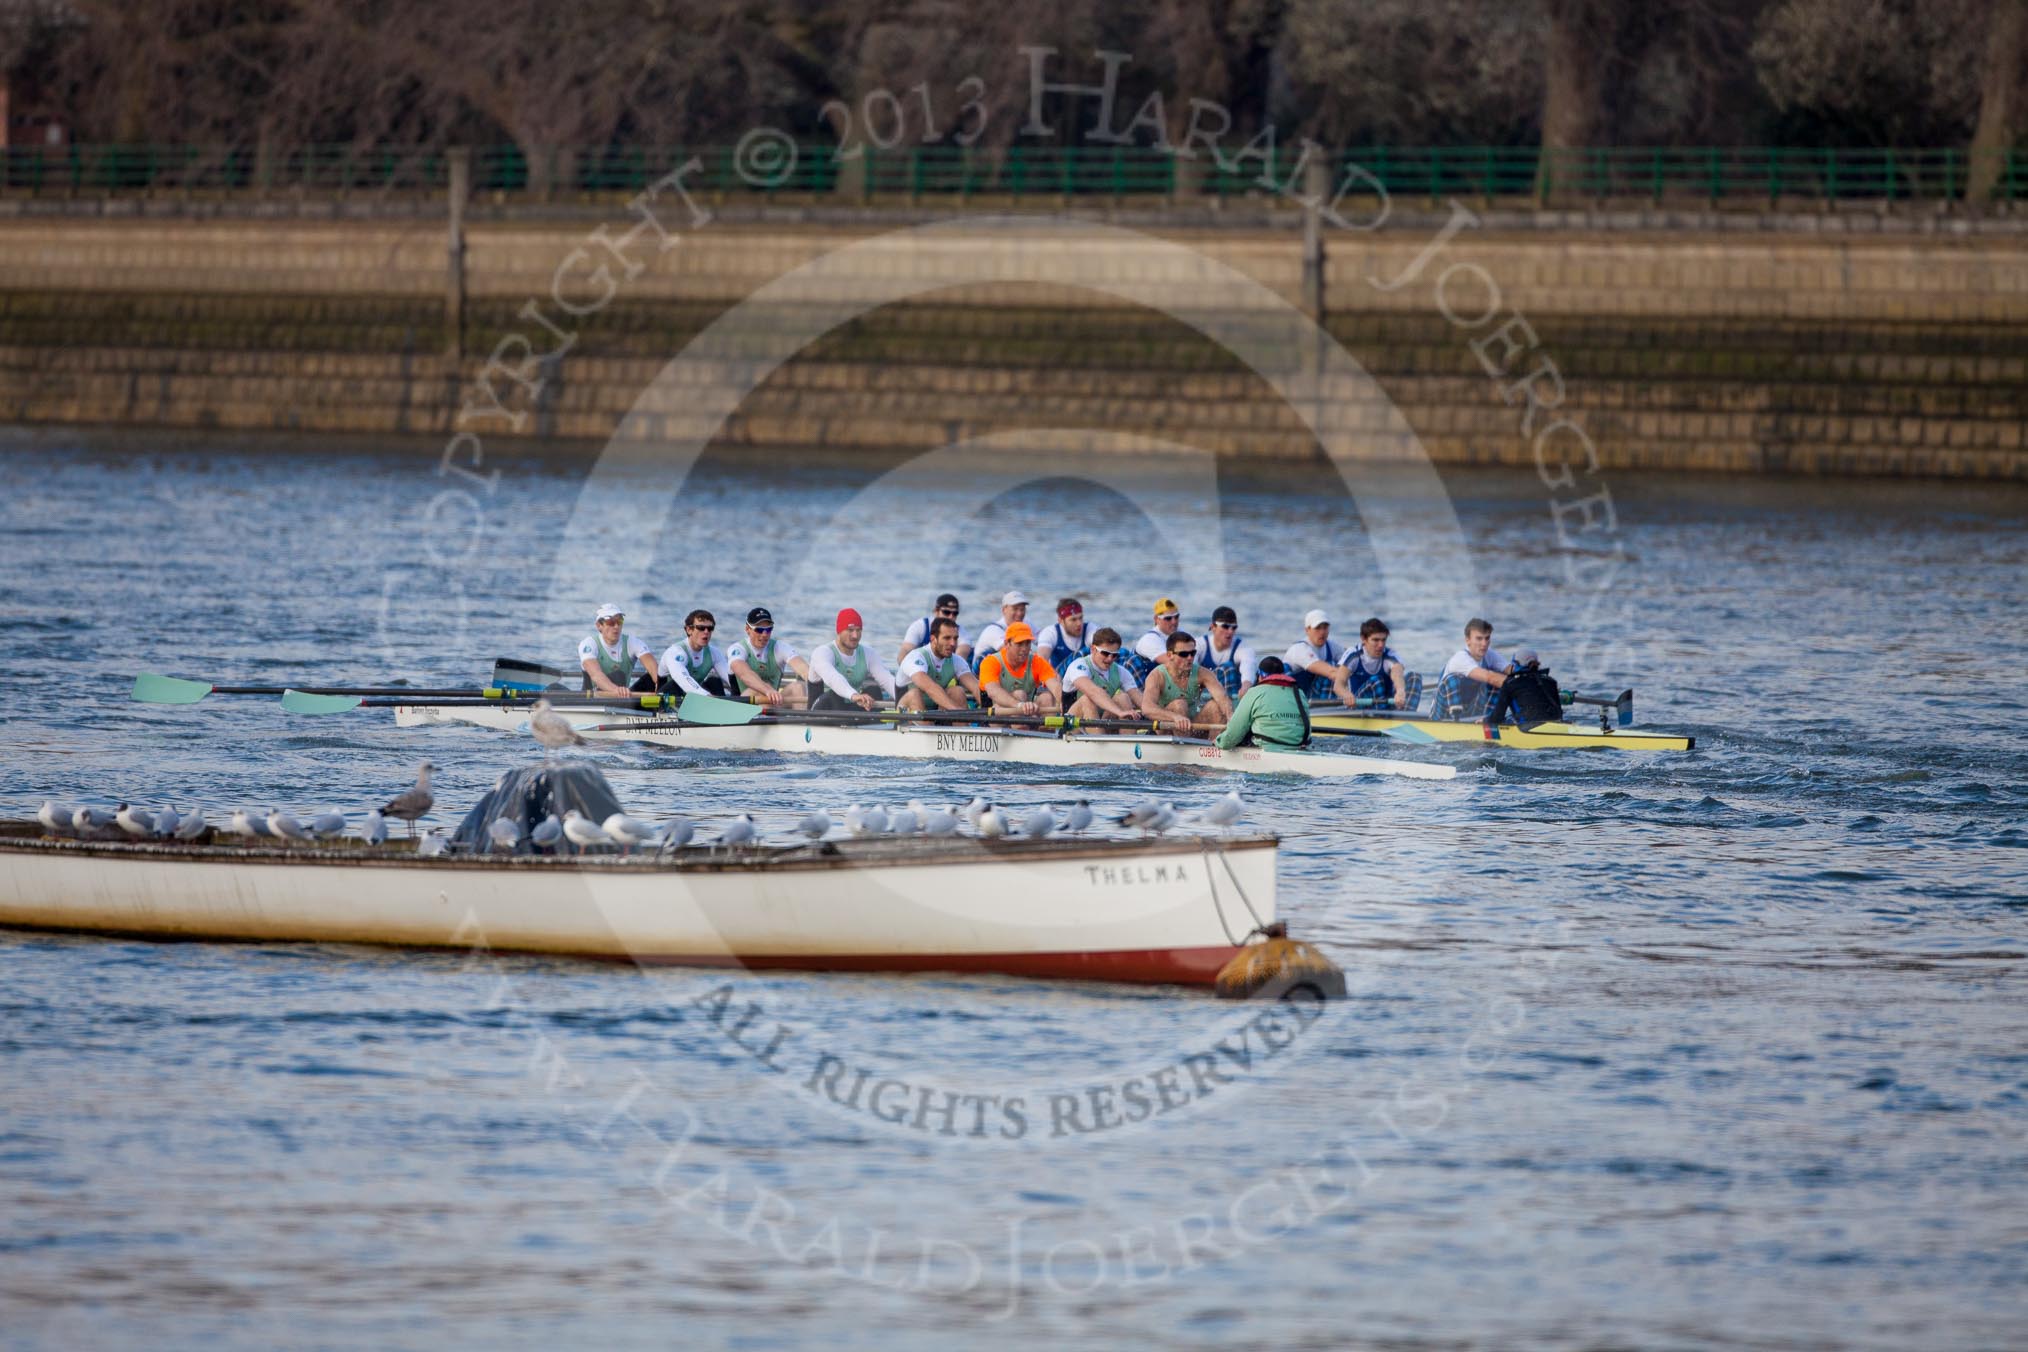 The Boat Race season 2013 - fixture CUBC vs Leander: The Goldie vs Imperial BC fixture..
River Thames Tideway between Putney Bridge and Mortlake,
London SW15,

United Kingdom,
on 02 March 2013 at 15:24, image #57